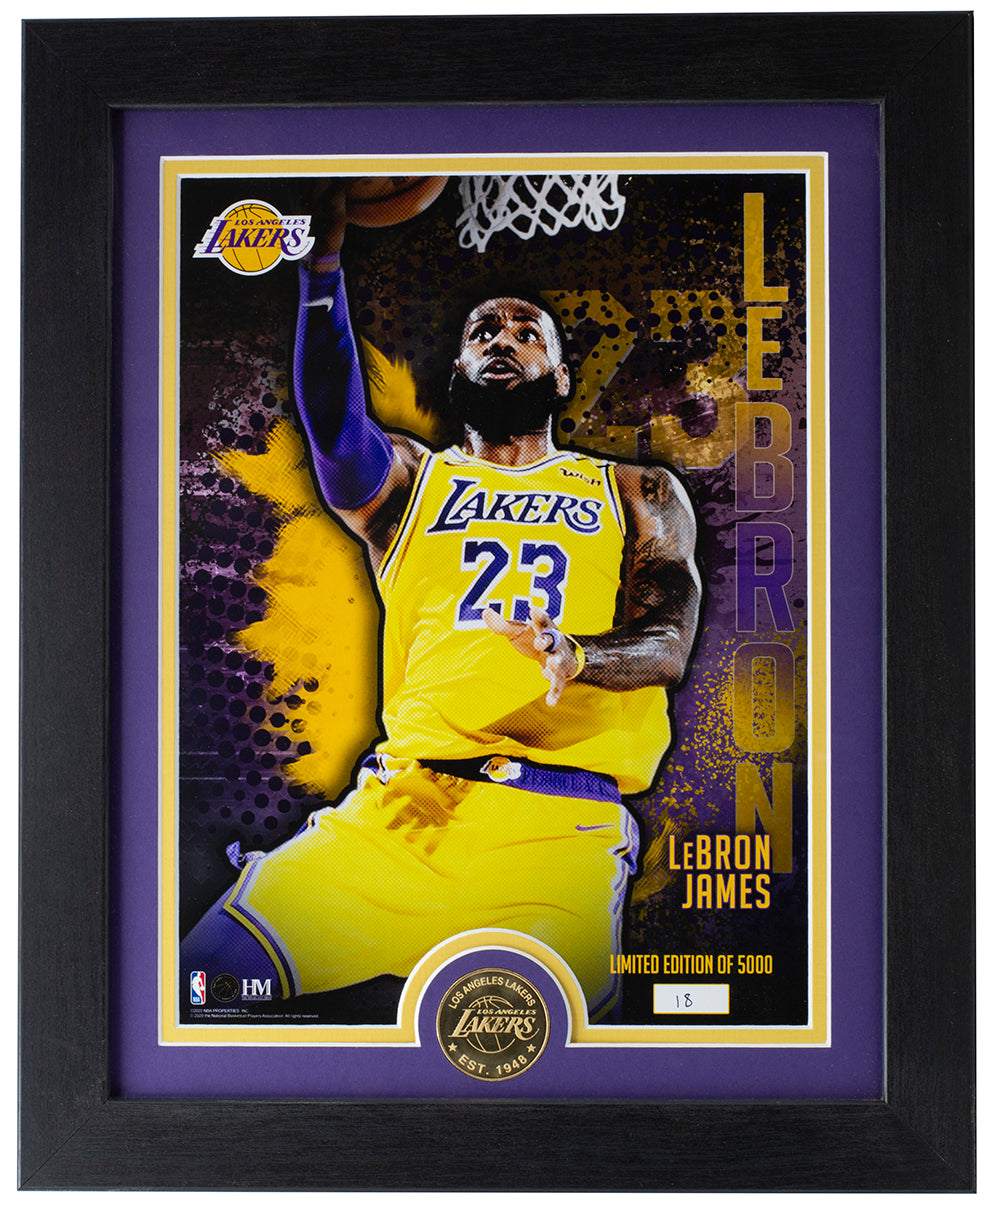 Lebron James LIMIT RELEASE BLACK FRIDAY LAKERS INSERT CARD - INVESTMENT -  MINT